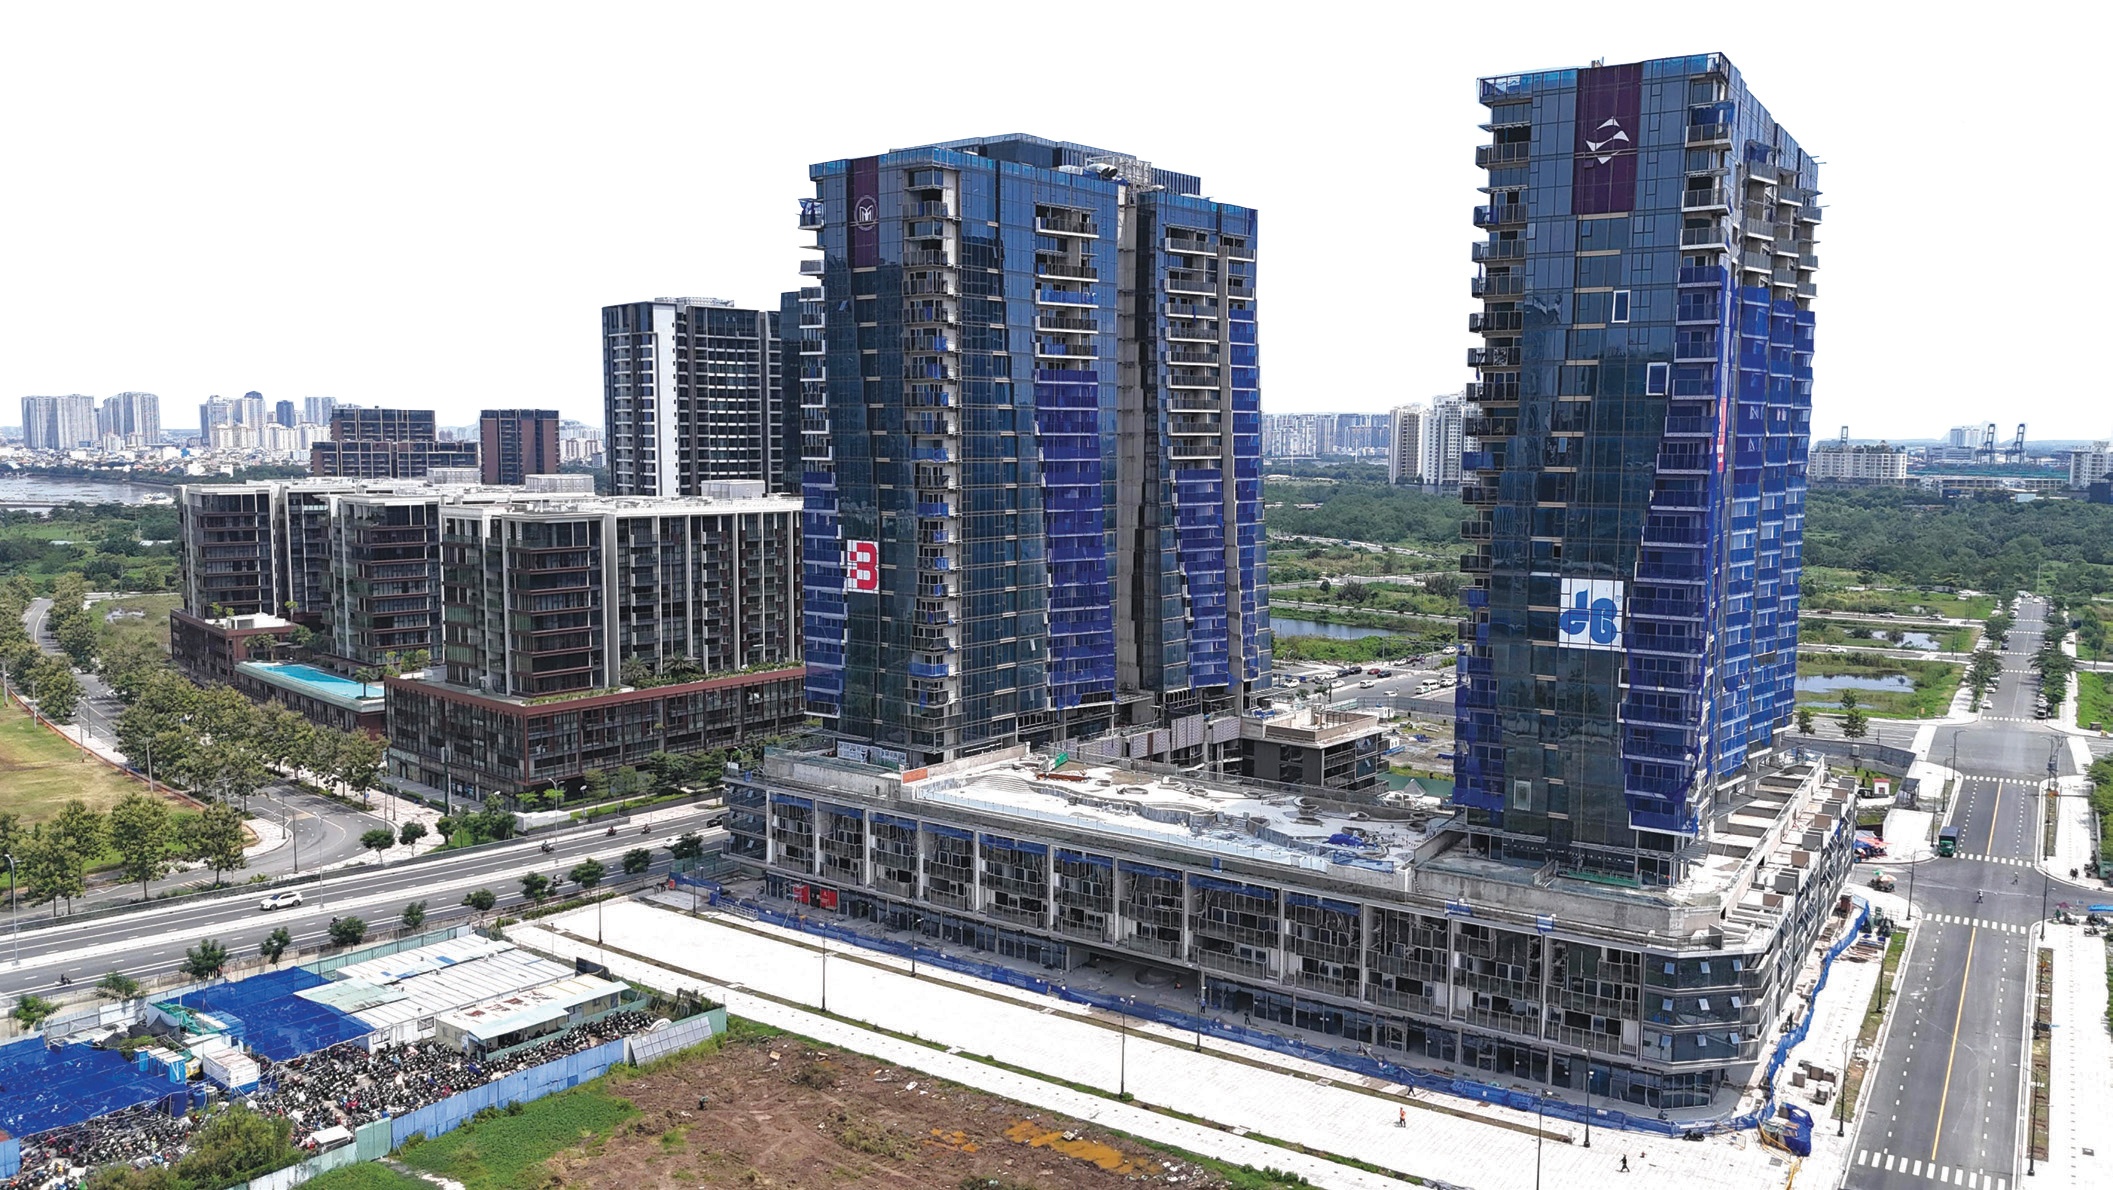 Land zoned for social housing expands to over 8,390ha: ministry